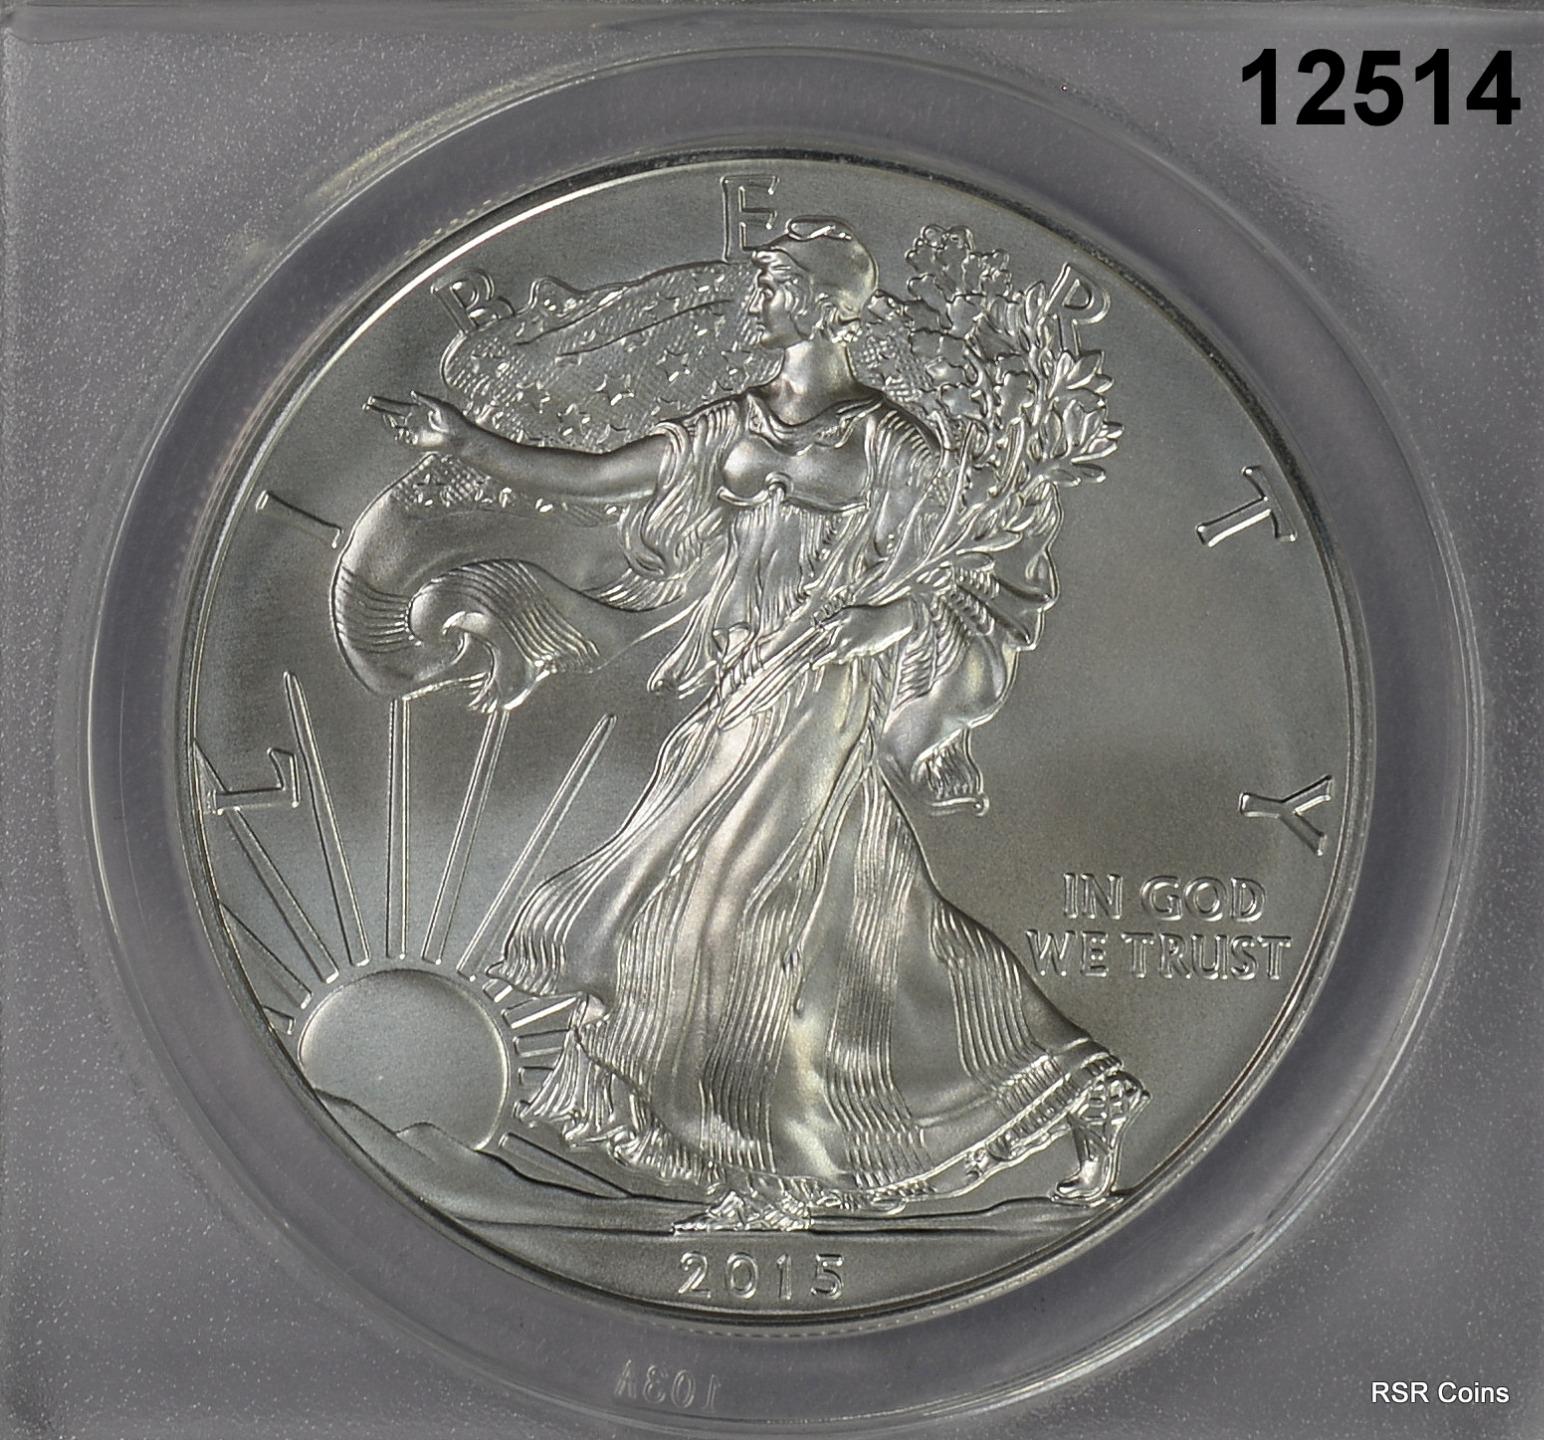 2015 W SILVER EAGLE $1 ANACS CERTIFIED SP70 #12514